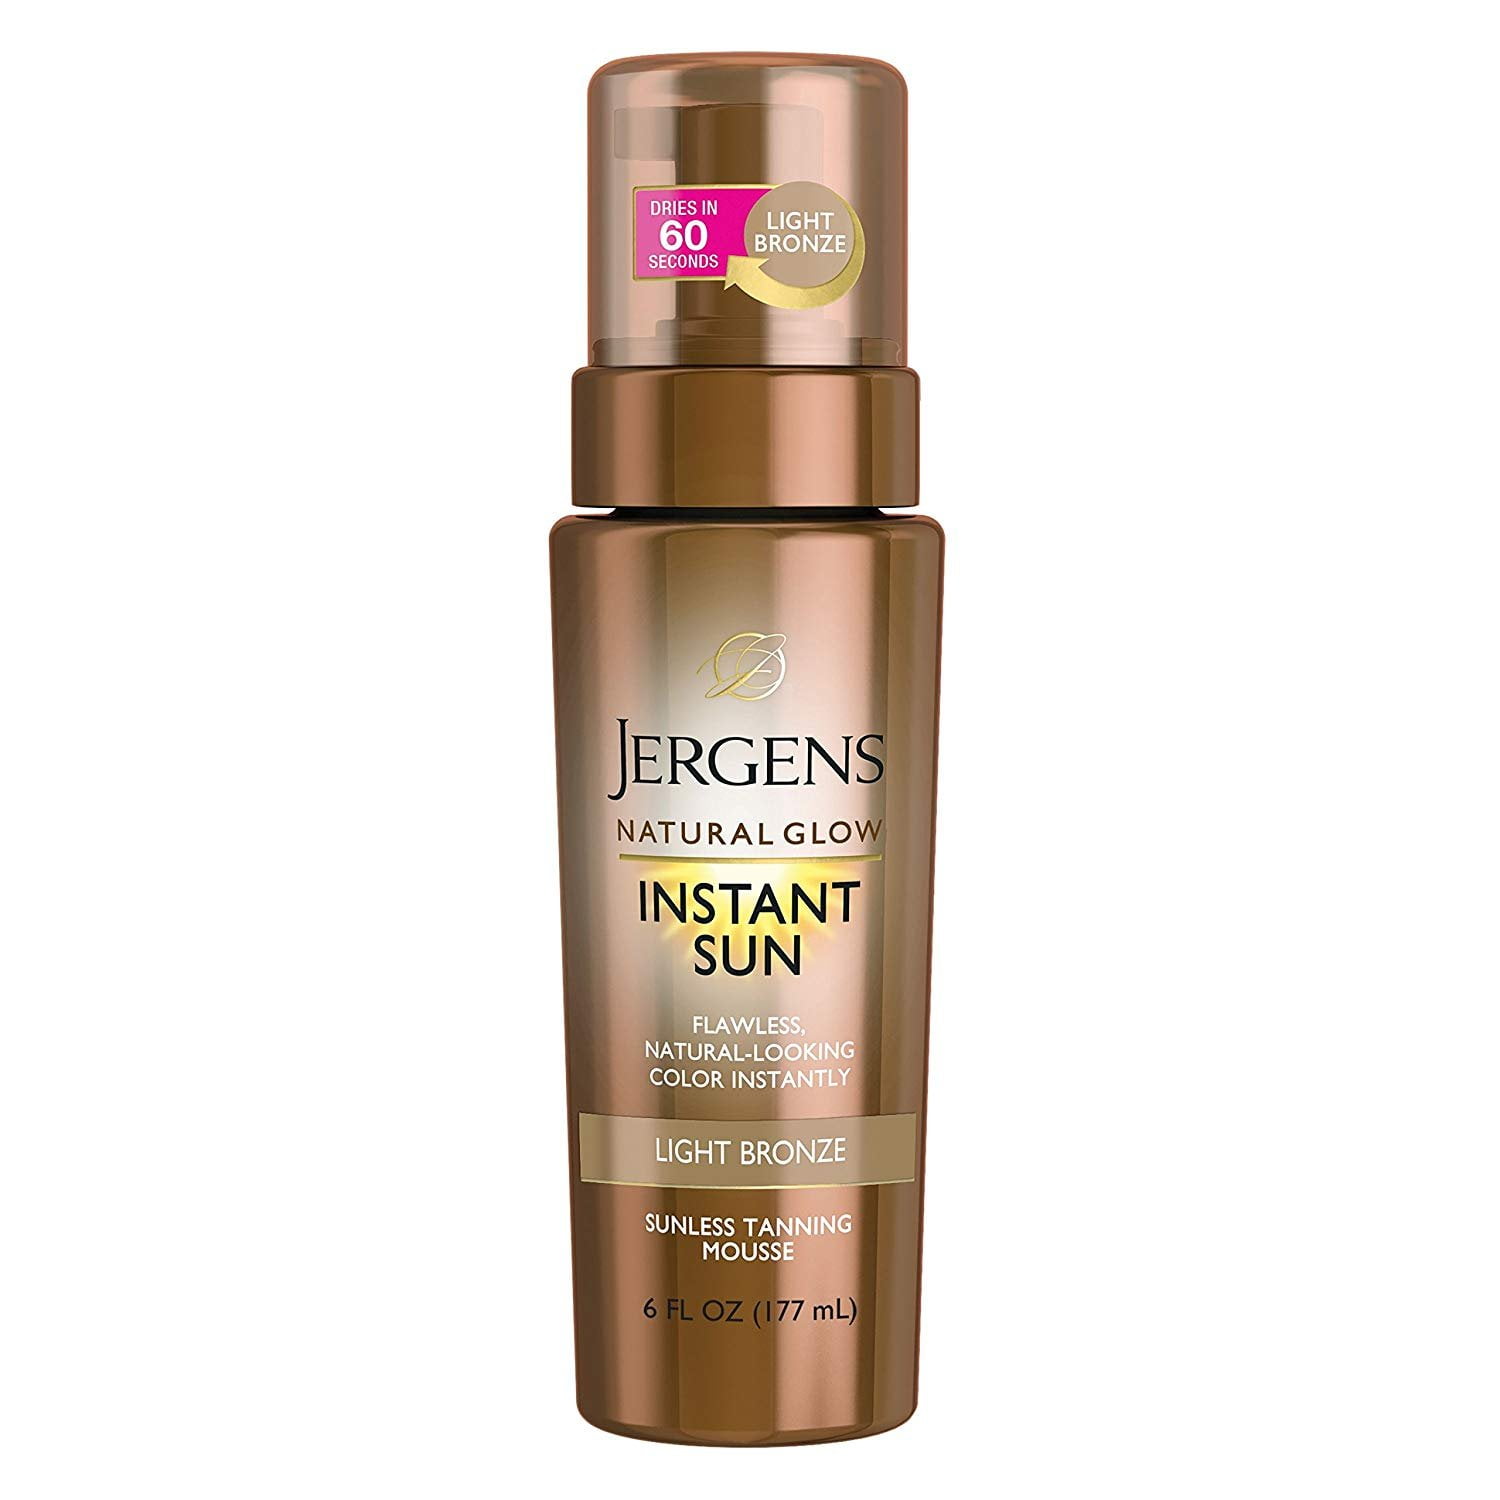 Jergens Natural Glow Instant Sun Sunless Tanning Mousse For Body, Light Bronze, 6 Ounces 